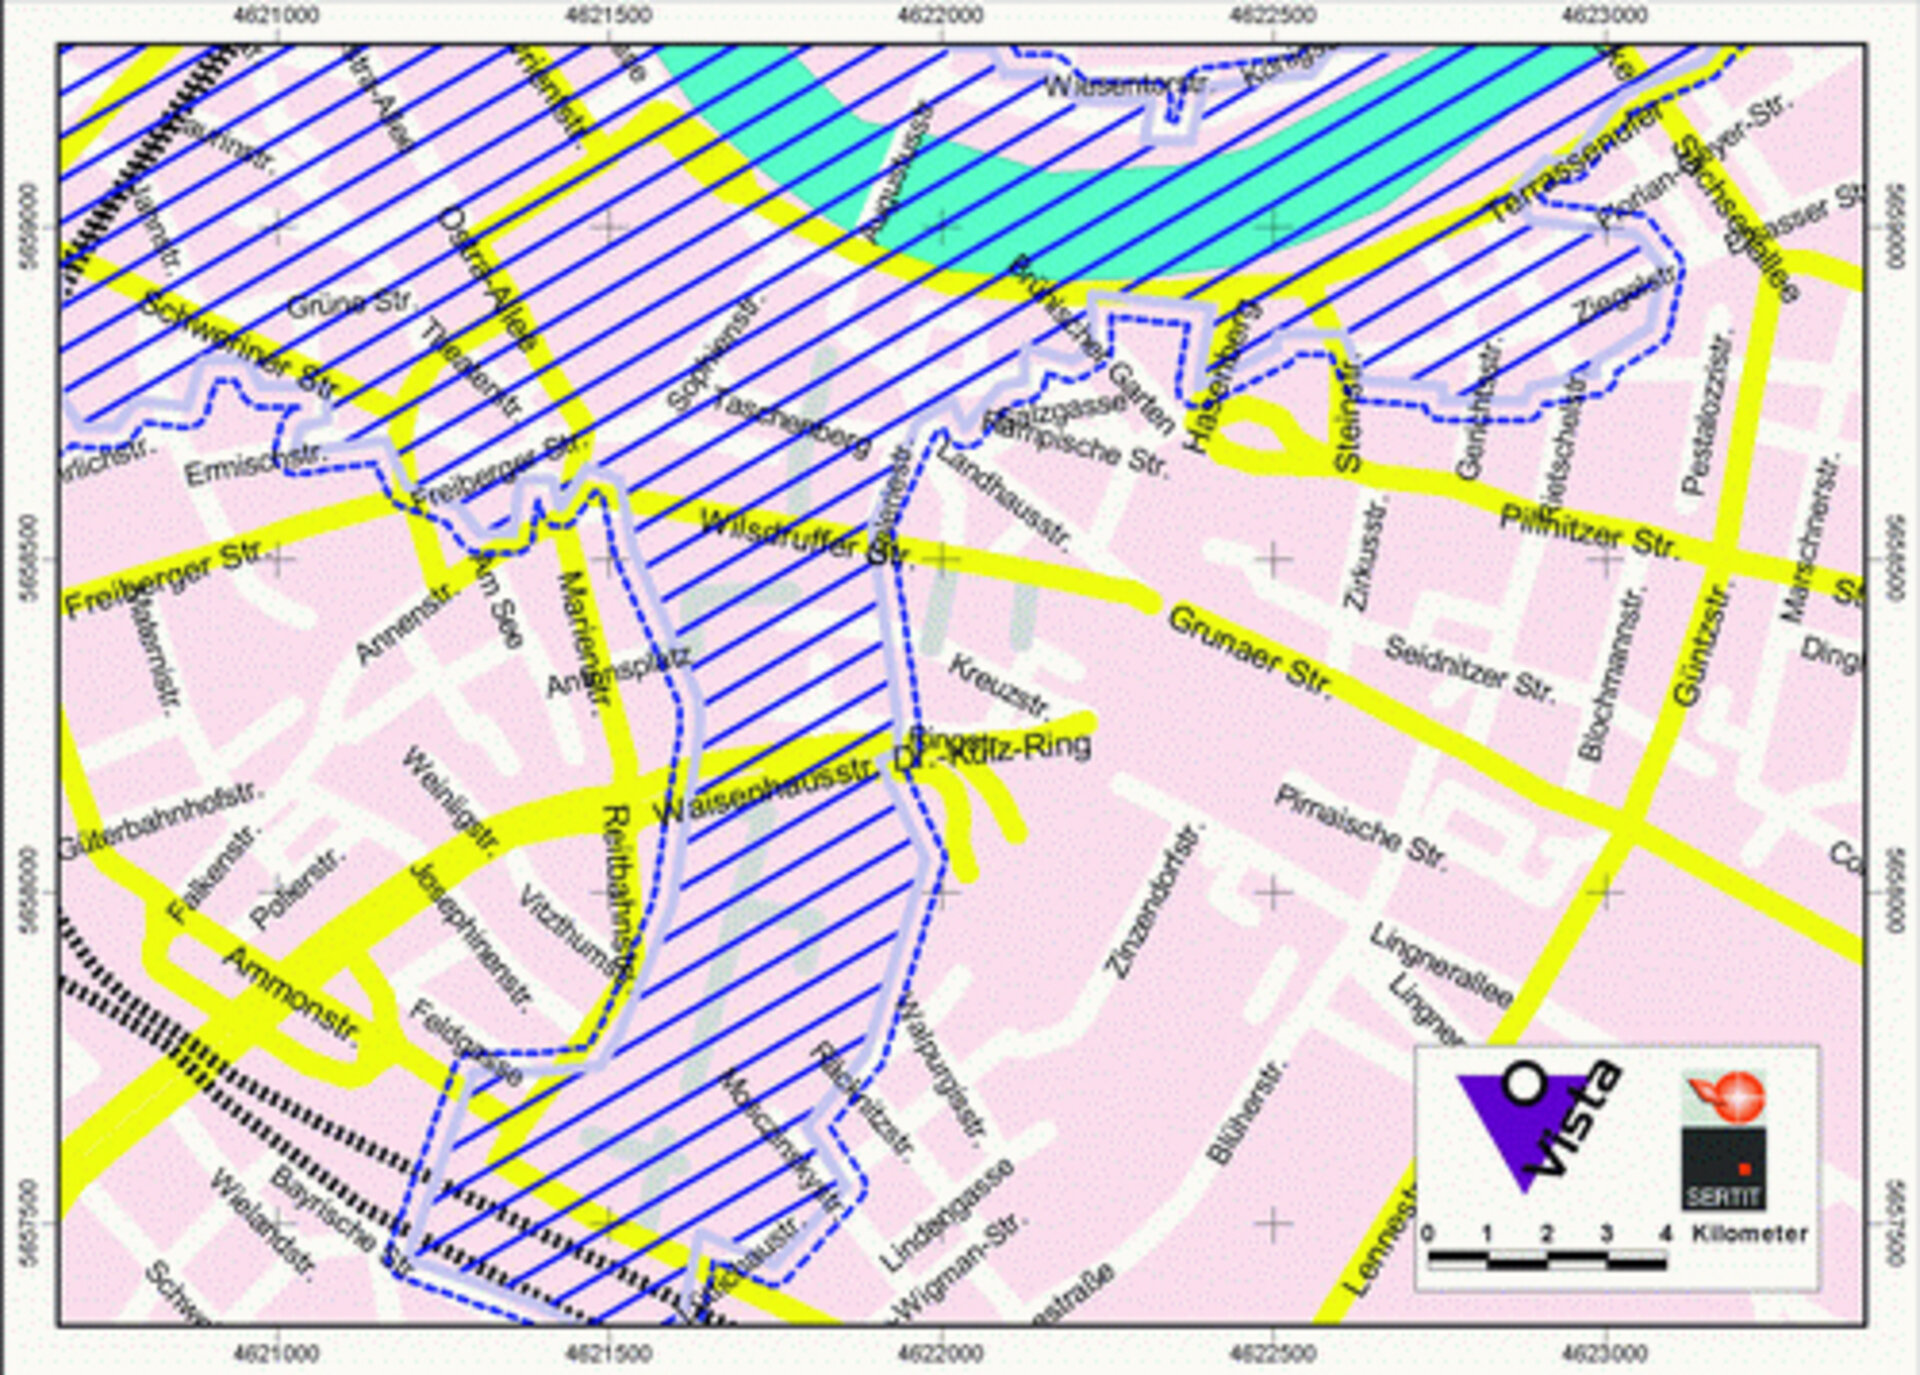 Flooded Dresden streets mapped